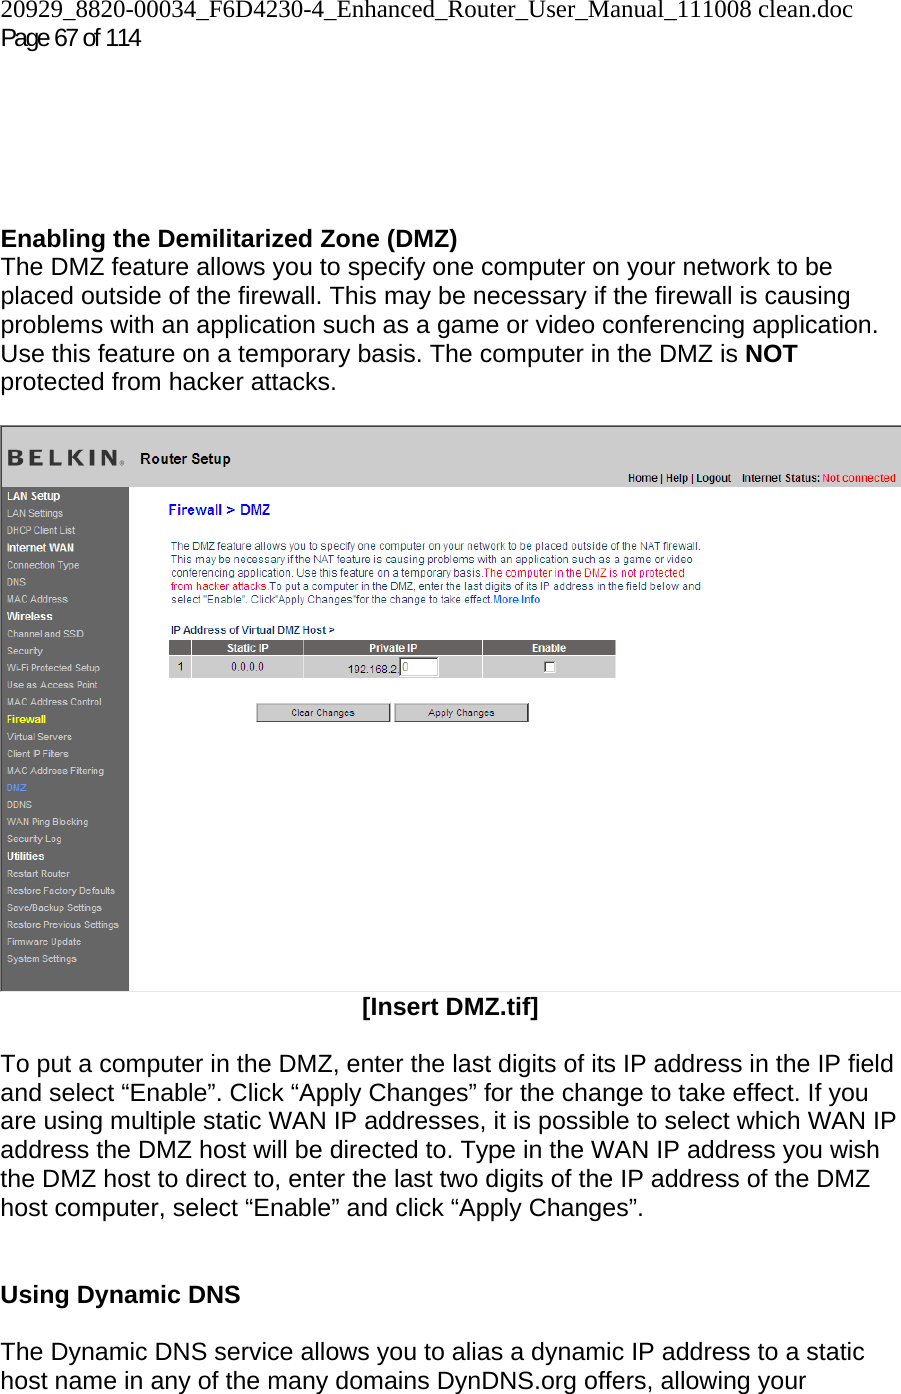 20929_8820-00034_F6D4230-4_Enhanced_Router_User_Manual_111008 clean.doc Page 67 of 114        Enabling the Demilitarized Zone (DMZ)  The DMZ feature allows you to specify one computer on your network to be placed outside of the firewall. This may be necessary if the firewall is causing problems with an application such as a game or video conferencing application. Use this feature on a temporary basis. The computer in the DMZ is NOT protected from hacker attacks.    [Insert DMZ.tif]  To put a computer in the DMZ, enter the last digits of its IP address in the IP field and select “Enable”. Click “Apply Changes” for the change to take effect. If you are using multiple static WAN IP addresses, it is possible to select which WAN IP address the DMZ host will be directed to. Type in the WAN IP address you wish the DMZ host to direct to, enter the last two digits of the IP address of the DMZ host computer, select “Enable” and click “Apply Changes”.   Using Dynamic DNS  The Dynamic DNS service allows you to alias a dynamic IP address to a static host name in any of the many domains DynDNS.org offers, allowing your 